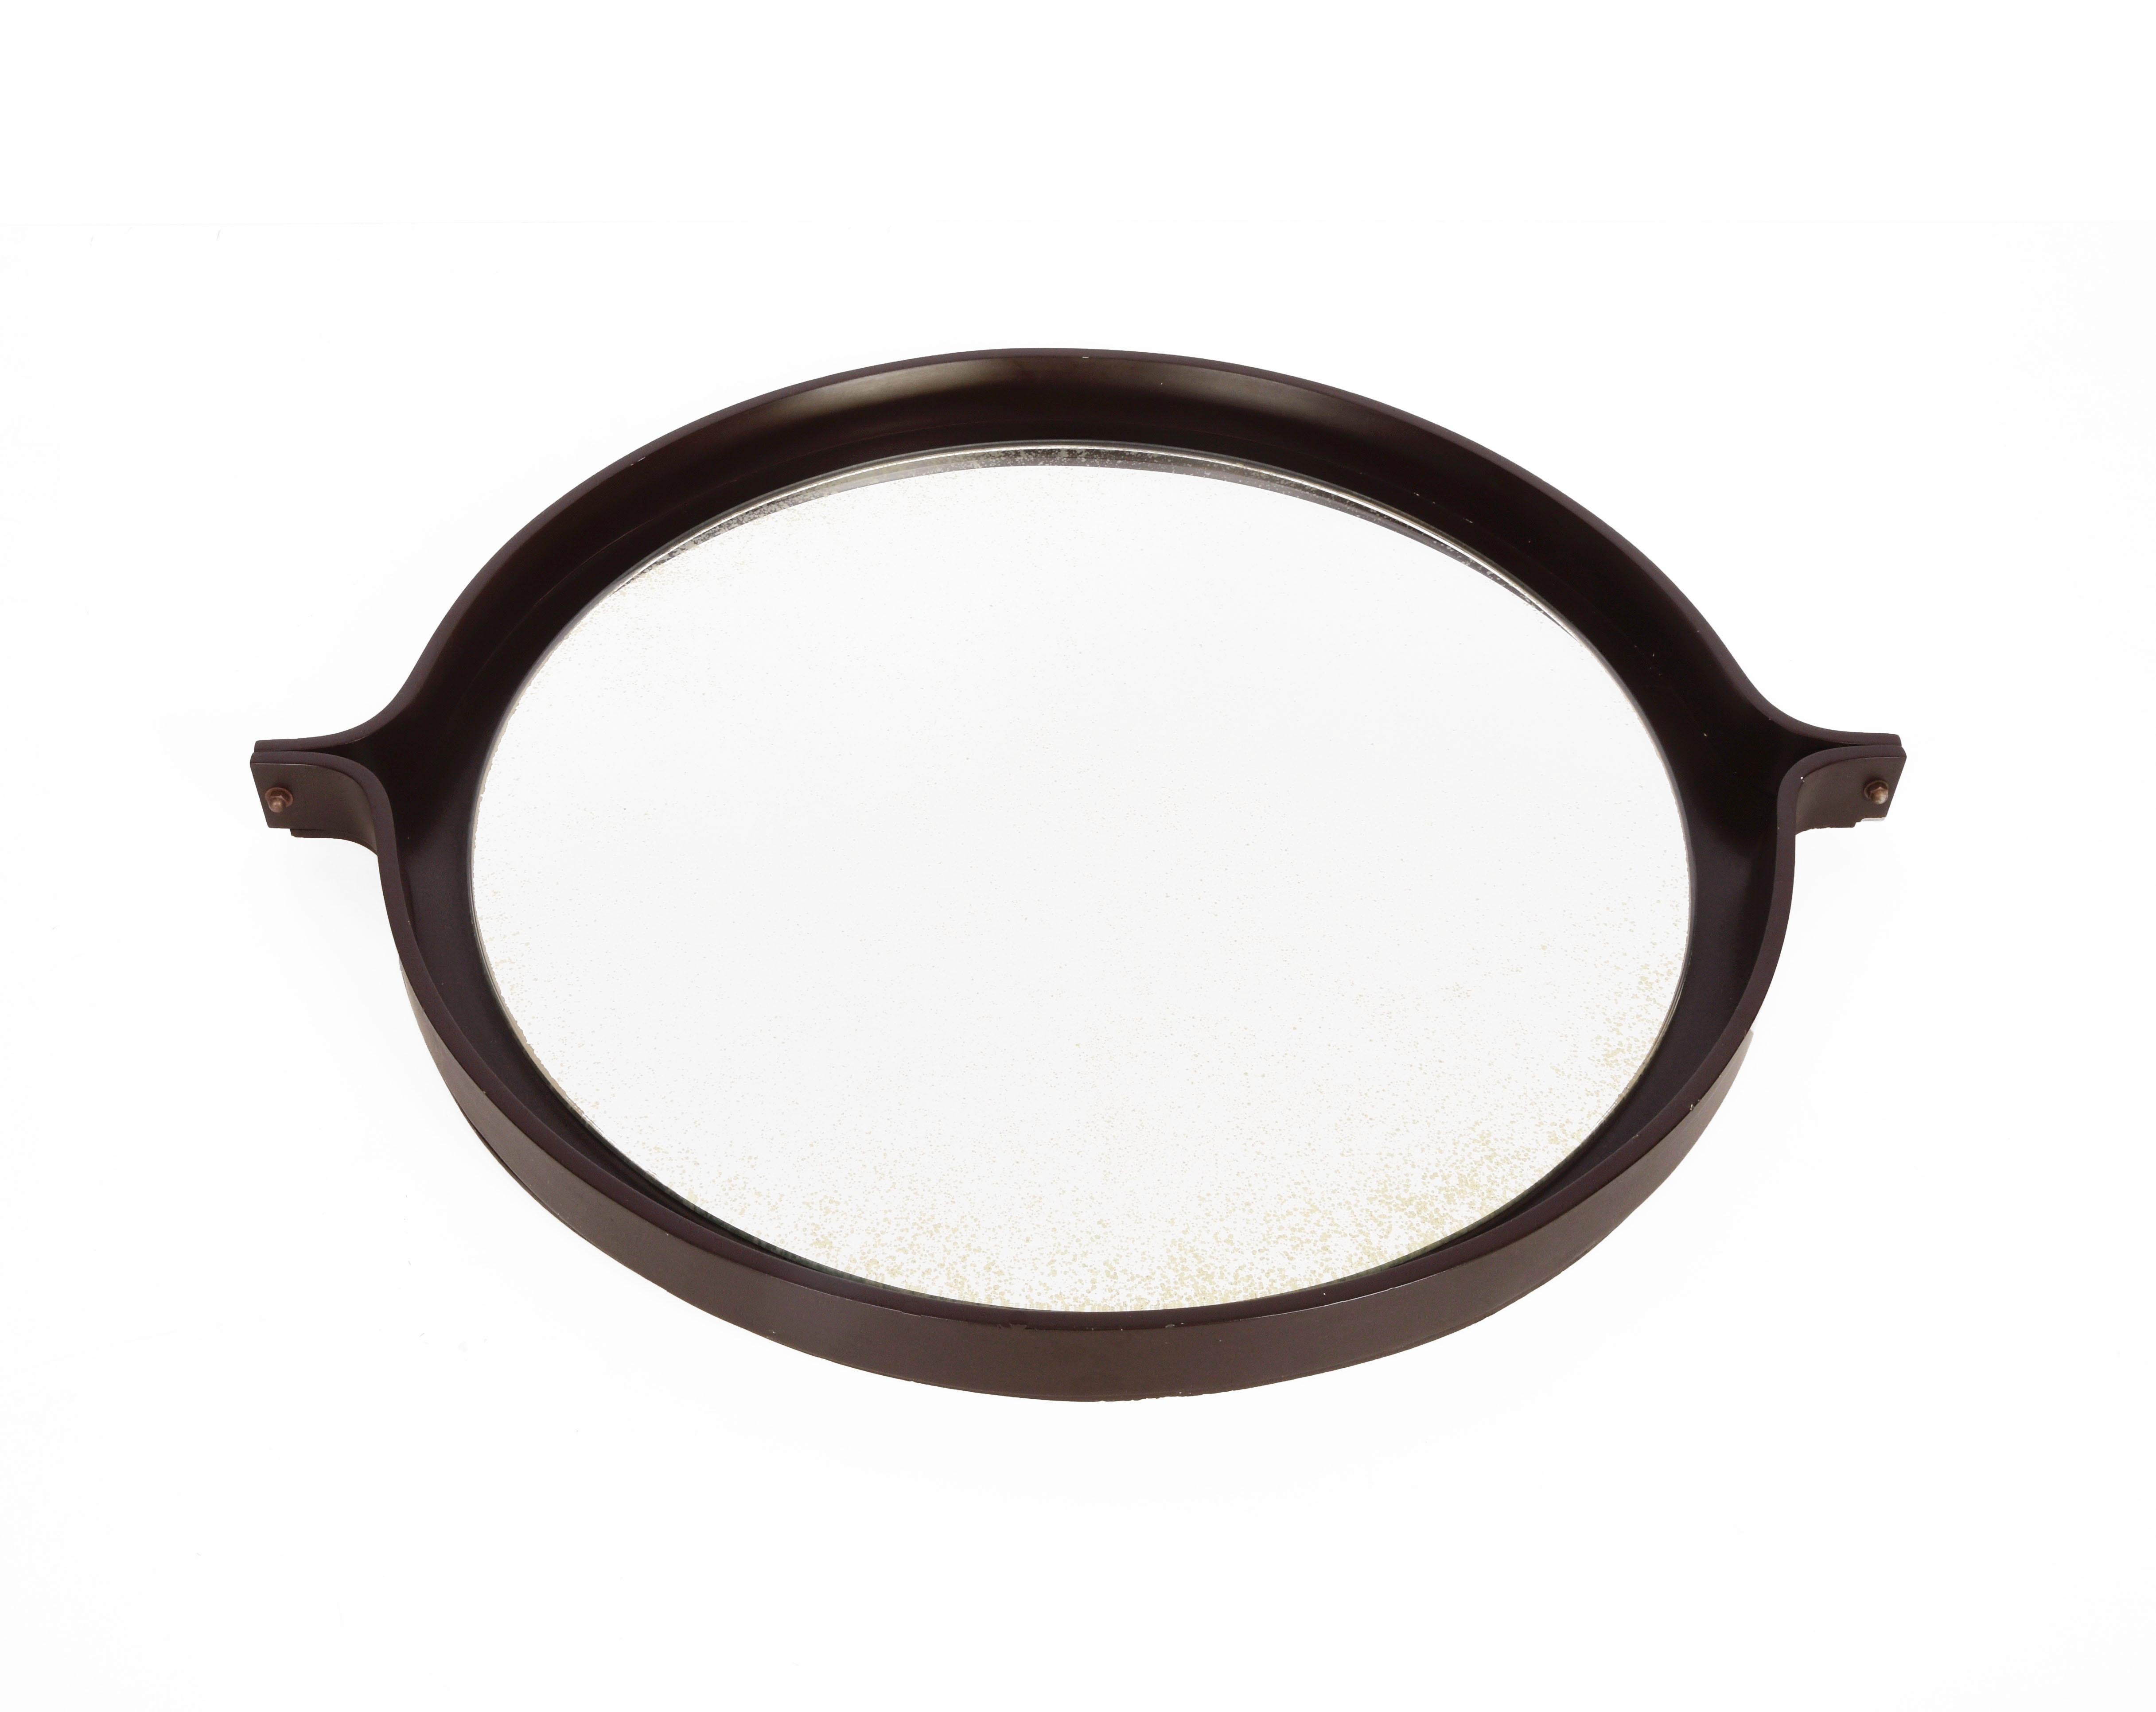 Amazing round dark brown wood mirror. This item was produced in Italy during the 1960s.

This wonderful piece is very elegant and timeless because of the simplicity of the materials and the midcentury lines.

The perfect element to enrich a